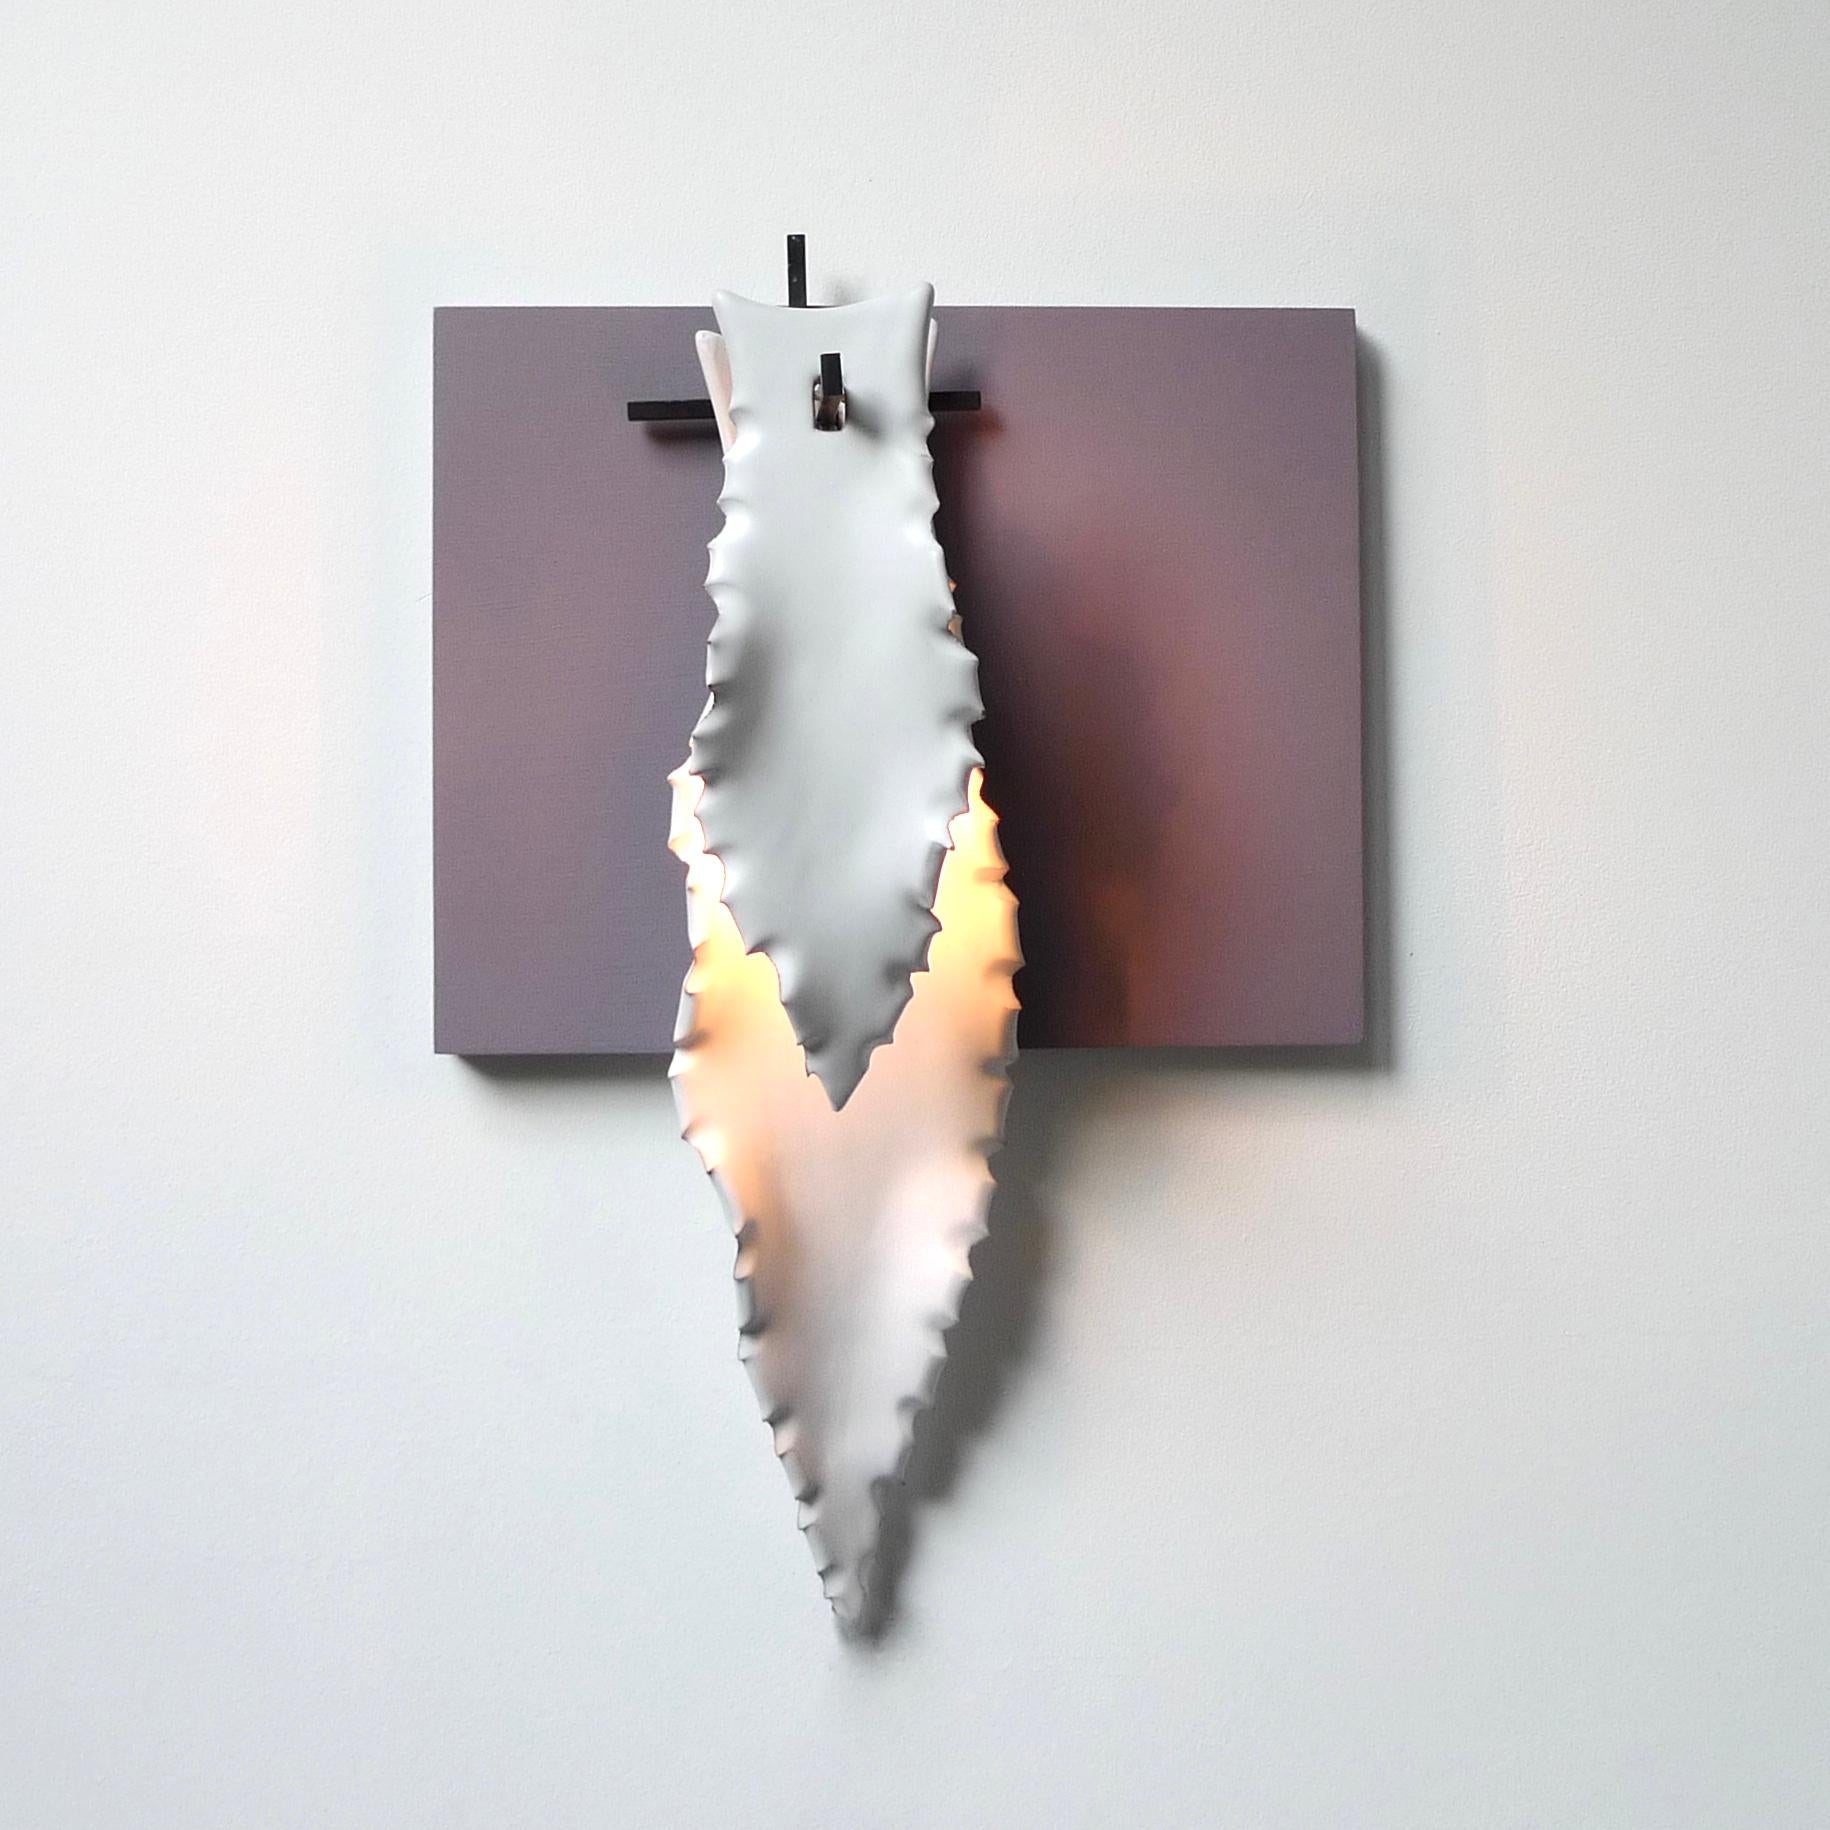 2 agave leafs wall light by Sander Bottinga
Dimensions: H 54 x W 12 x D 13 cm
Materials: Ceramic, forged iron

Handmade matt white agave leaves in ceramics from the famous ceramic village Grottaglie / Puglia in the south of Italy.
Base in